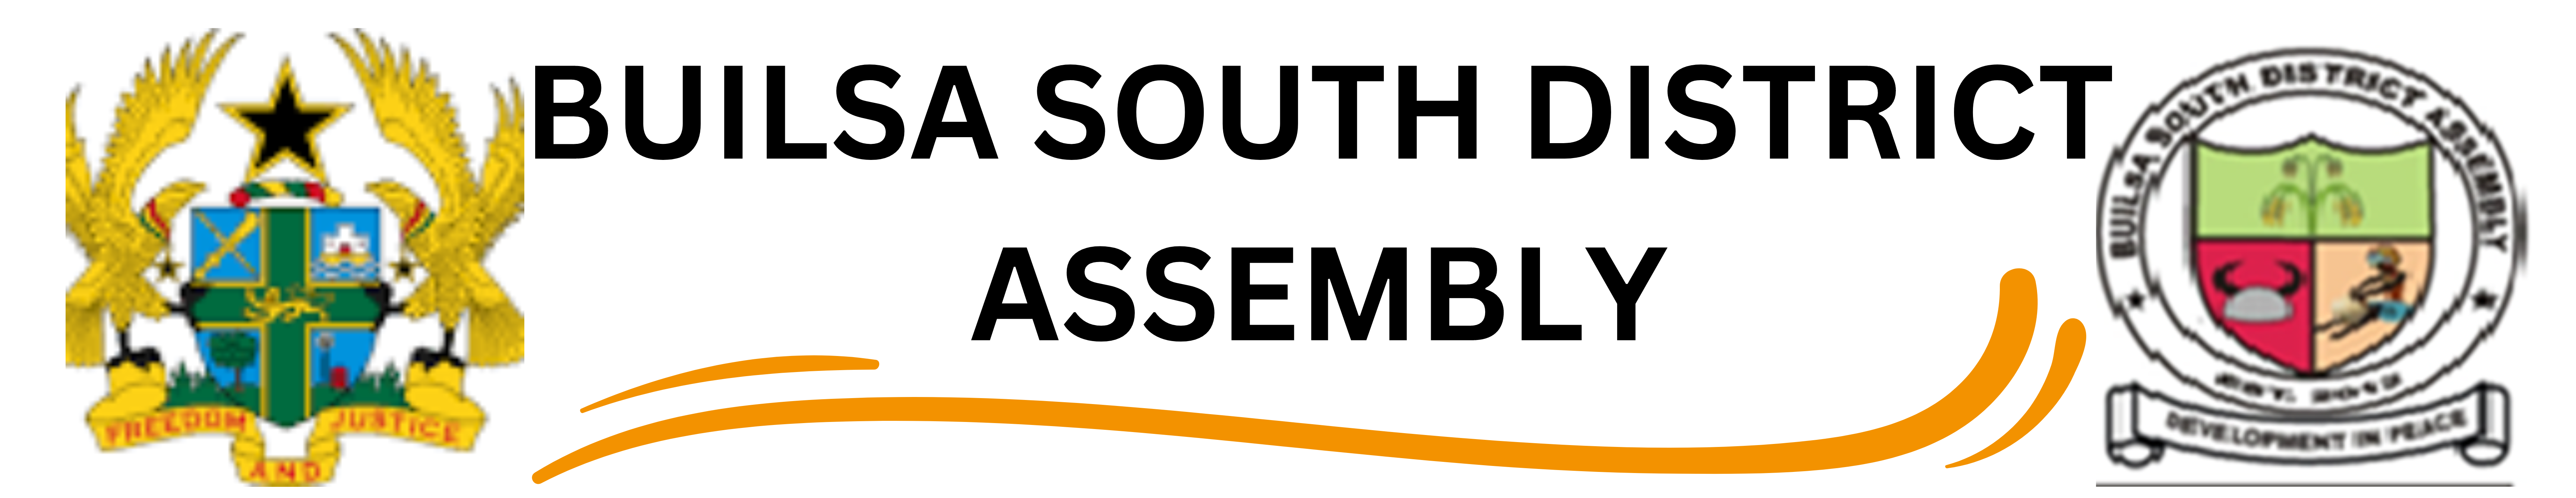 BUILSA SOUTH DISTRICT ASSEMBLY